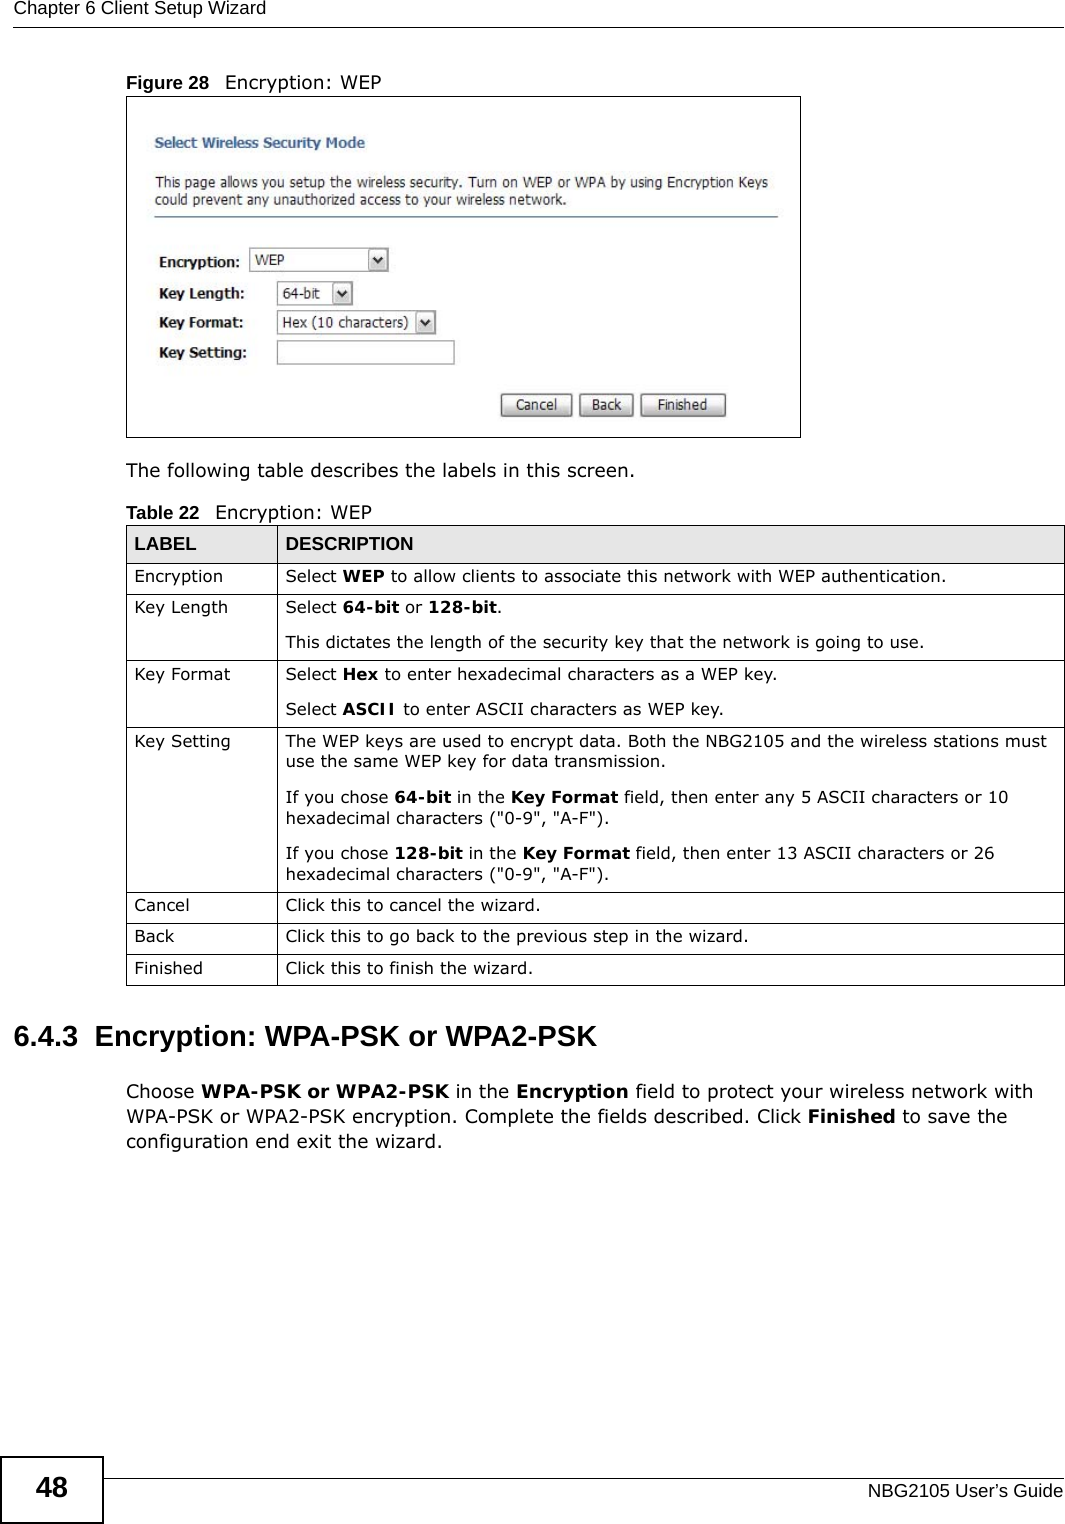 Chapter 6 Client Setup WizardNBG2105 User’s Guide48Figure 28   Encryption: WEP The following table describes the labels in this screen. 6.4.3  Encryption: WPA-PSK or WPA2-PSKChoose WPA-PSK or WPA2-PSK in the Encryption field to protect your wireless network with WPA-PSK or WPA2-PSK encryption. Complete the fields described. Click Finished to save the configuration end exit the wizard.Table 22   Encryption: WEPLABEL DESCRIPTIONEncryption Select WEP to allow clients to associate this network with WEP authentication.Key Length Select 64-bit or 128-bit.This dictates the length of the security key that the network is going to use.Key Format Select Hex to enter hexadecimal characters as a WEP key. Select ASCII to enter ASCII characters as WEP key. Key Setting The WEP keys are used to encrypt data. Both the NBG2105 and the wireless stations must use the same WEP key for data transmission.If you chose 64-bit in the Key Format field, then enter any 5 ASCII characters or 10 hexadecimal characters (&quot;0-9&quot;, &quot;A-F&quot;).If you chose 128-bit in the Key Format field, then enter 13 ASCII characters or 26 hexadecimal characters (&quot;0-9&quot;, &quot;A-F&quot;). Cancel Click this to cancel the wizard.Back Click this to go back to the previous step in the wizard.Finished Click this to finish the wizard.